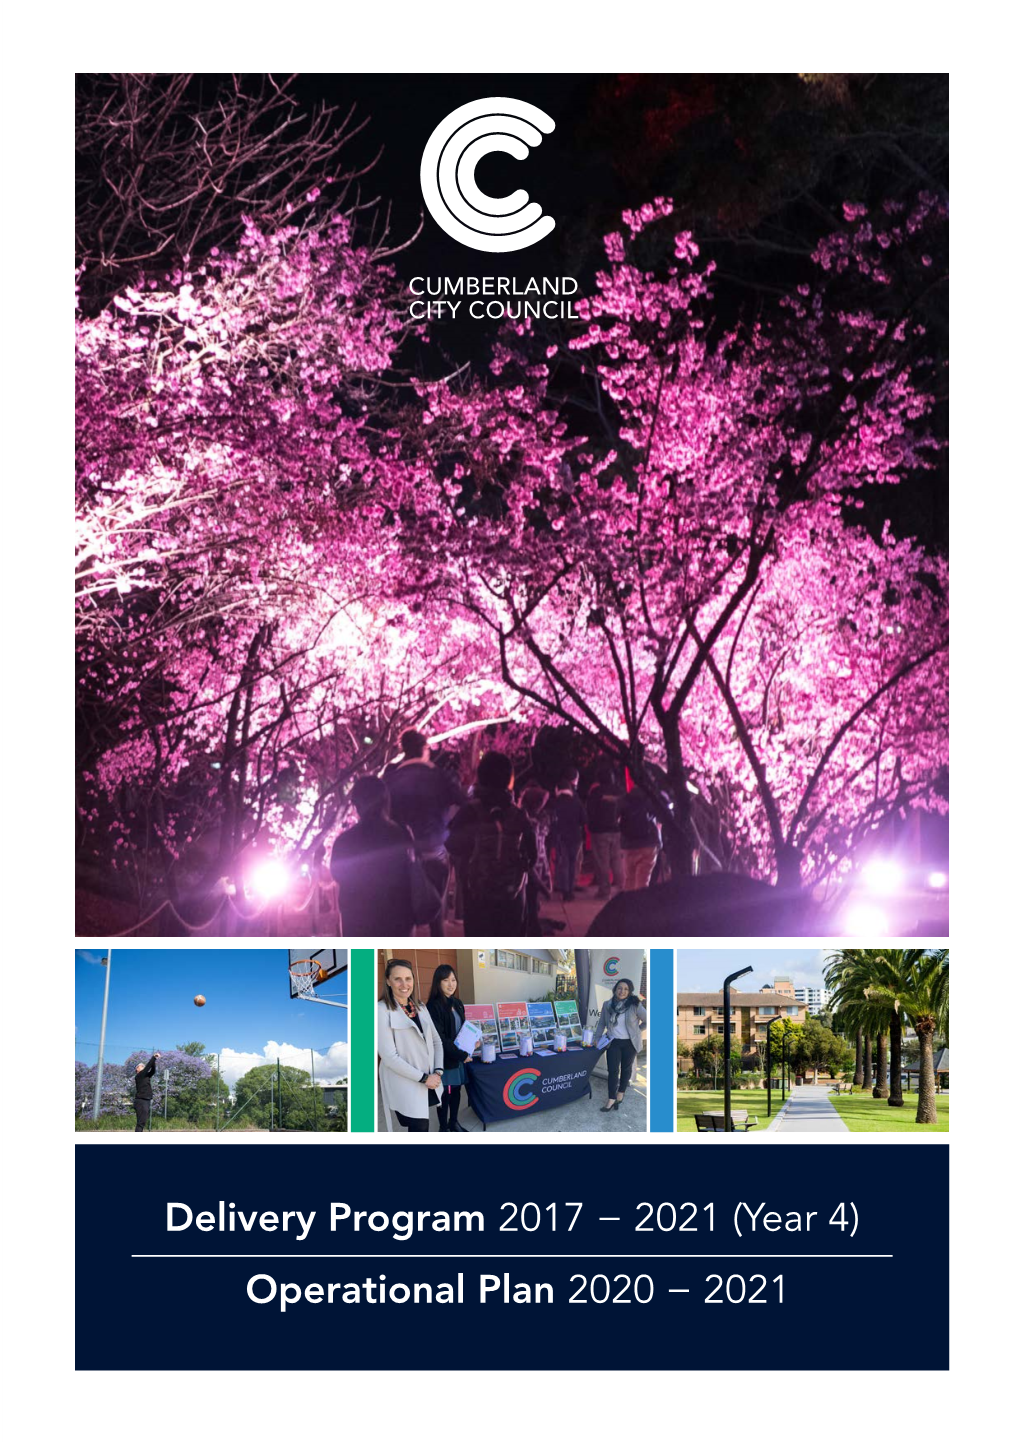 Delivery Program 2017 to 2021 and Operational